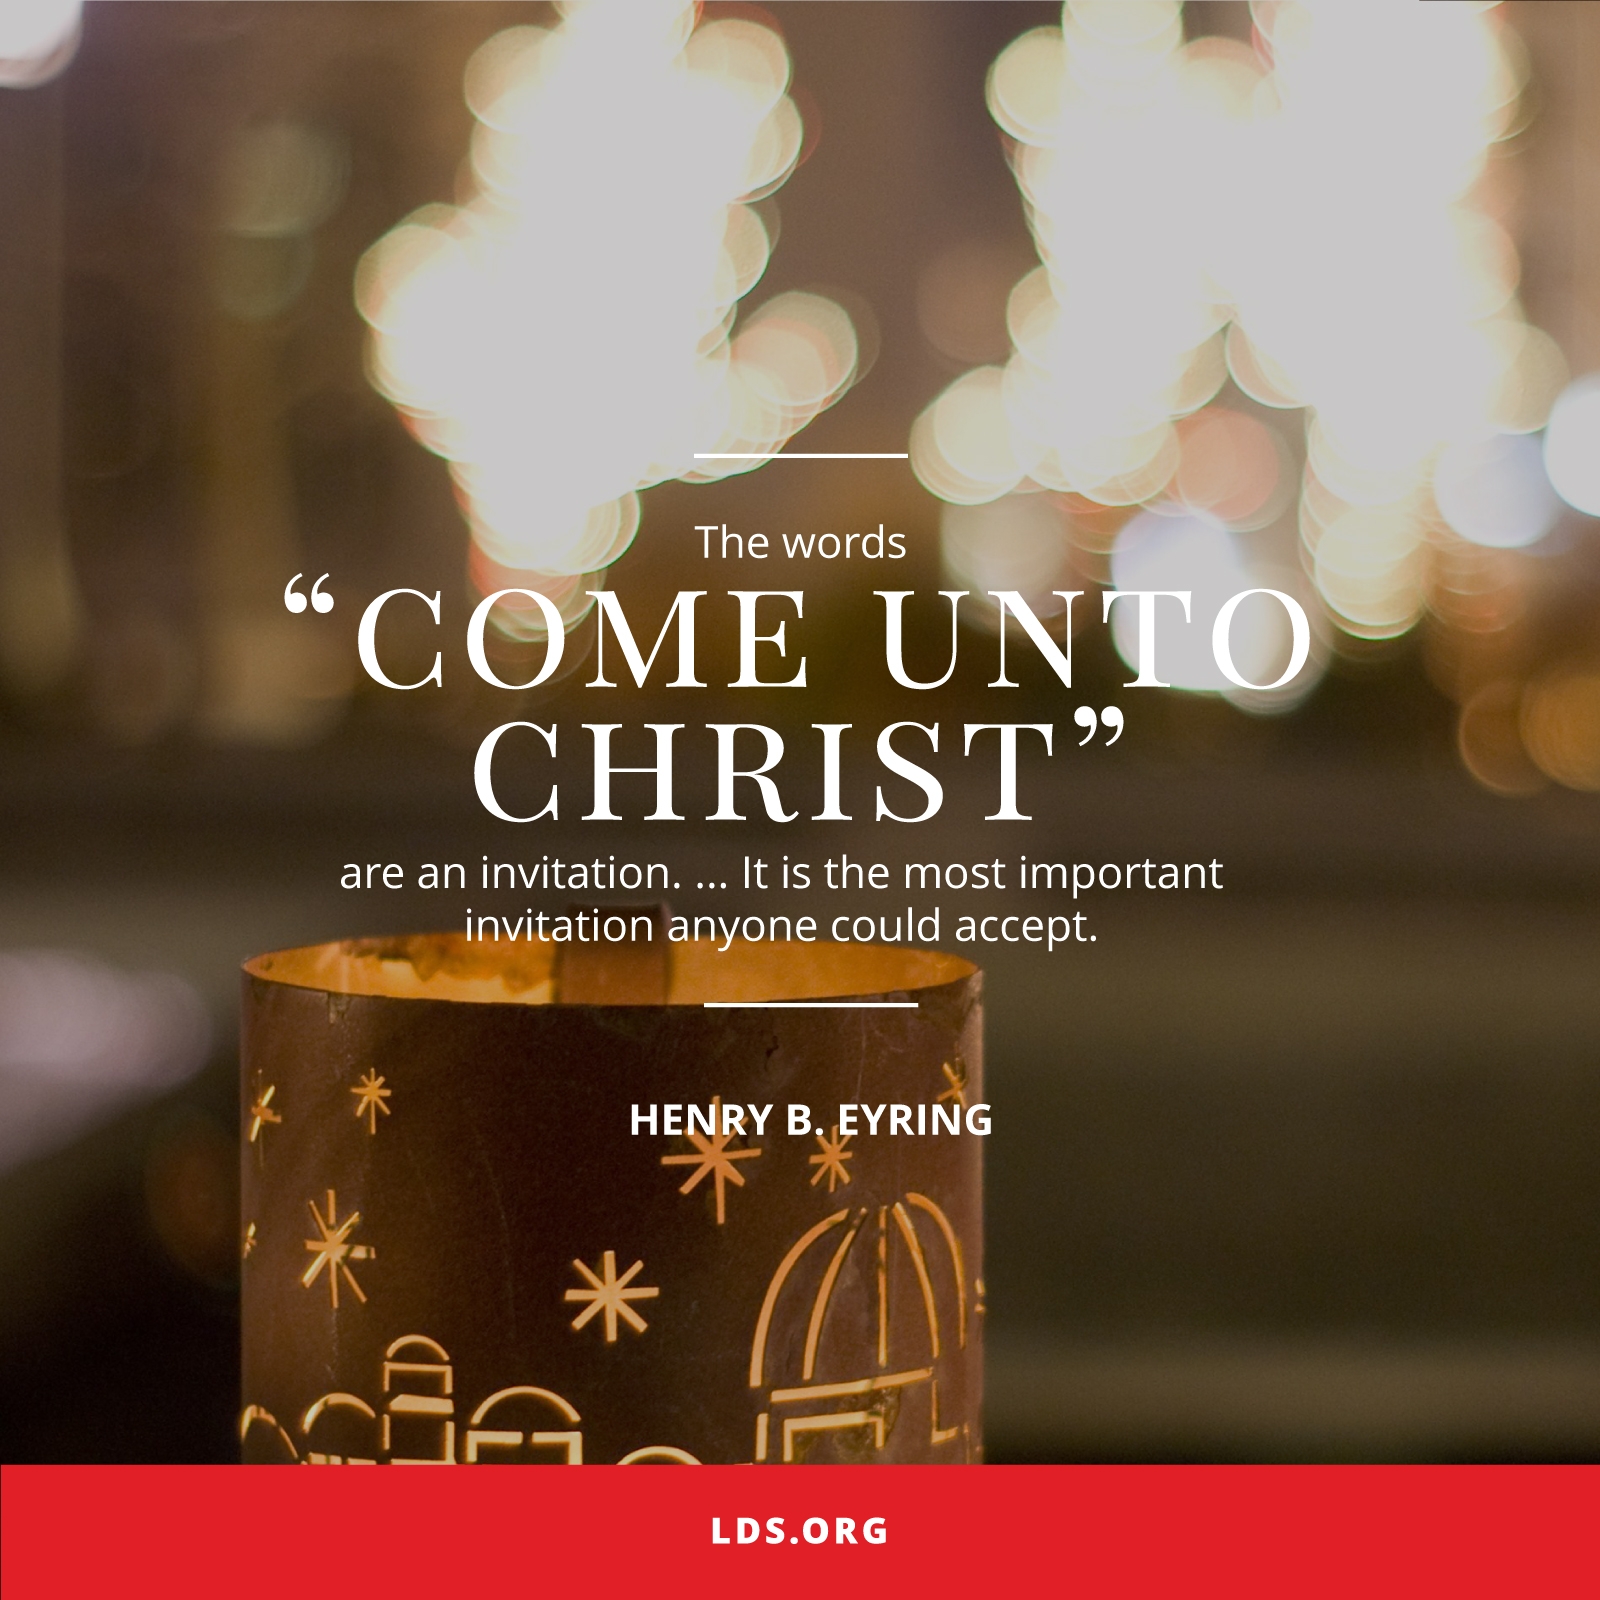 An image of a metal luminaria at Christmastime, coupled with a quote by President Henry B. Eyring: “The words ‘Come unto Christ’ are an invitation.”